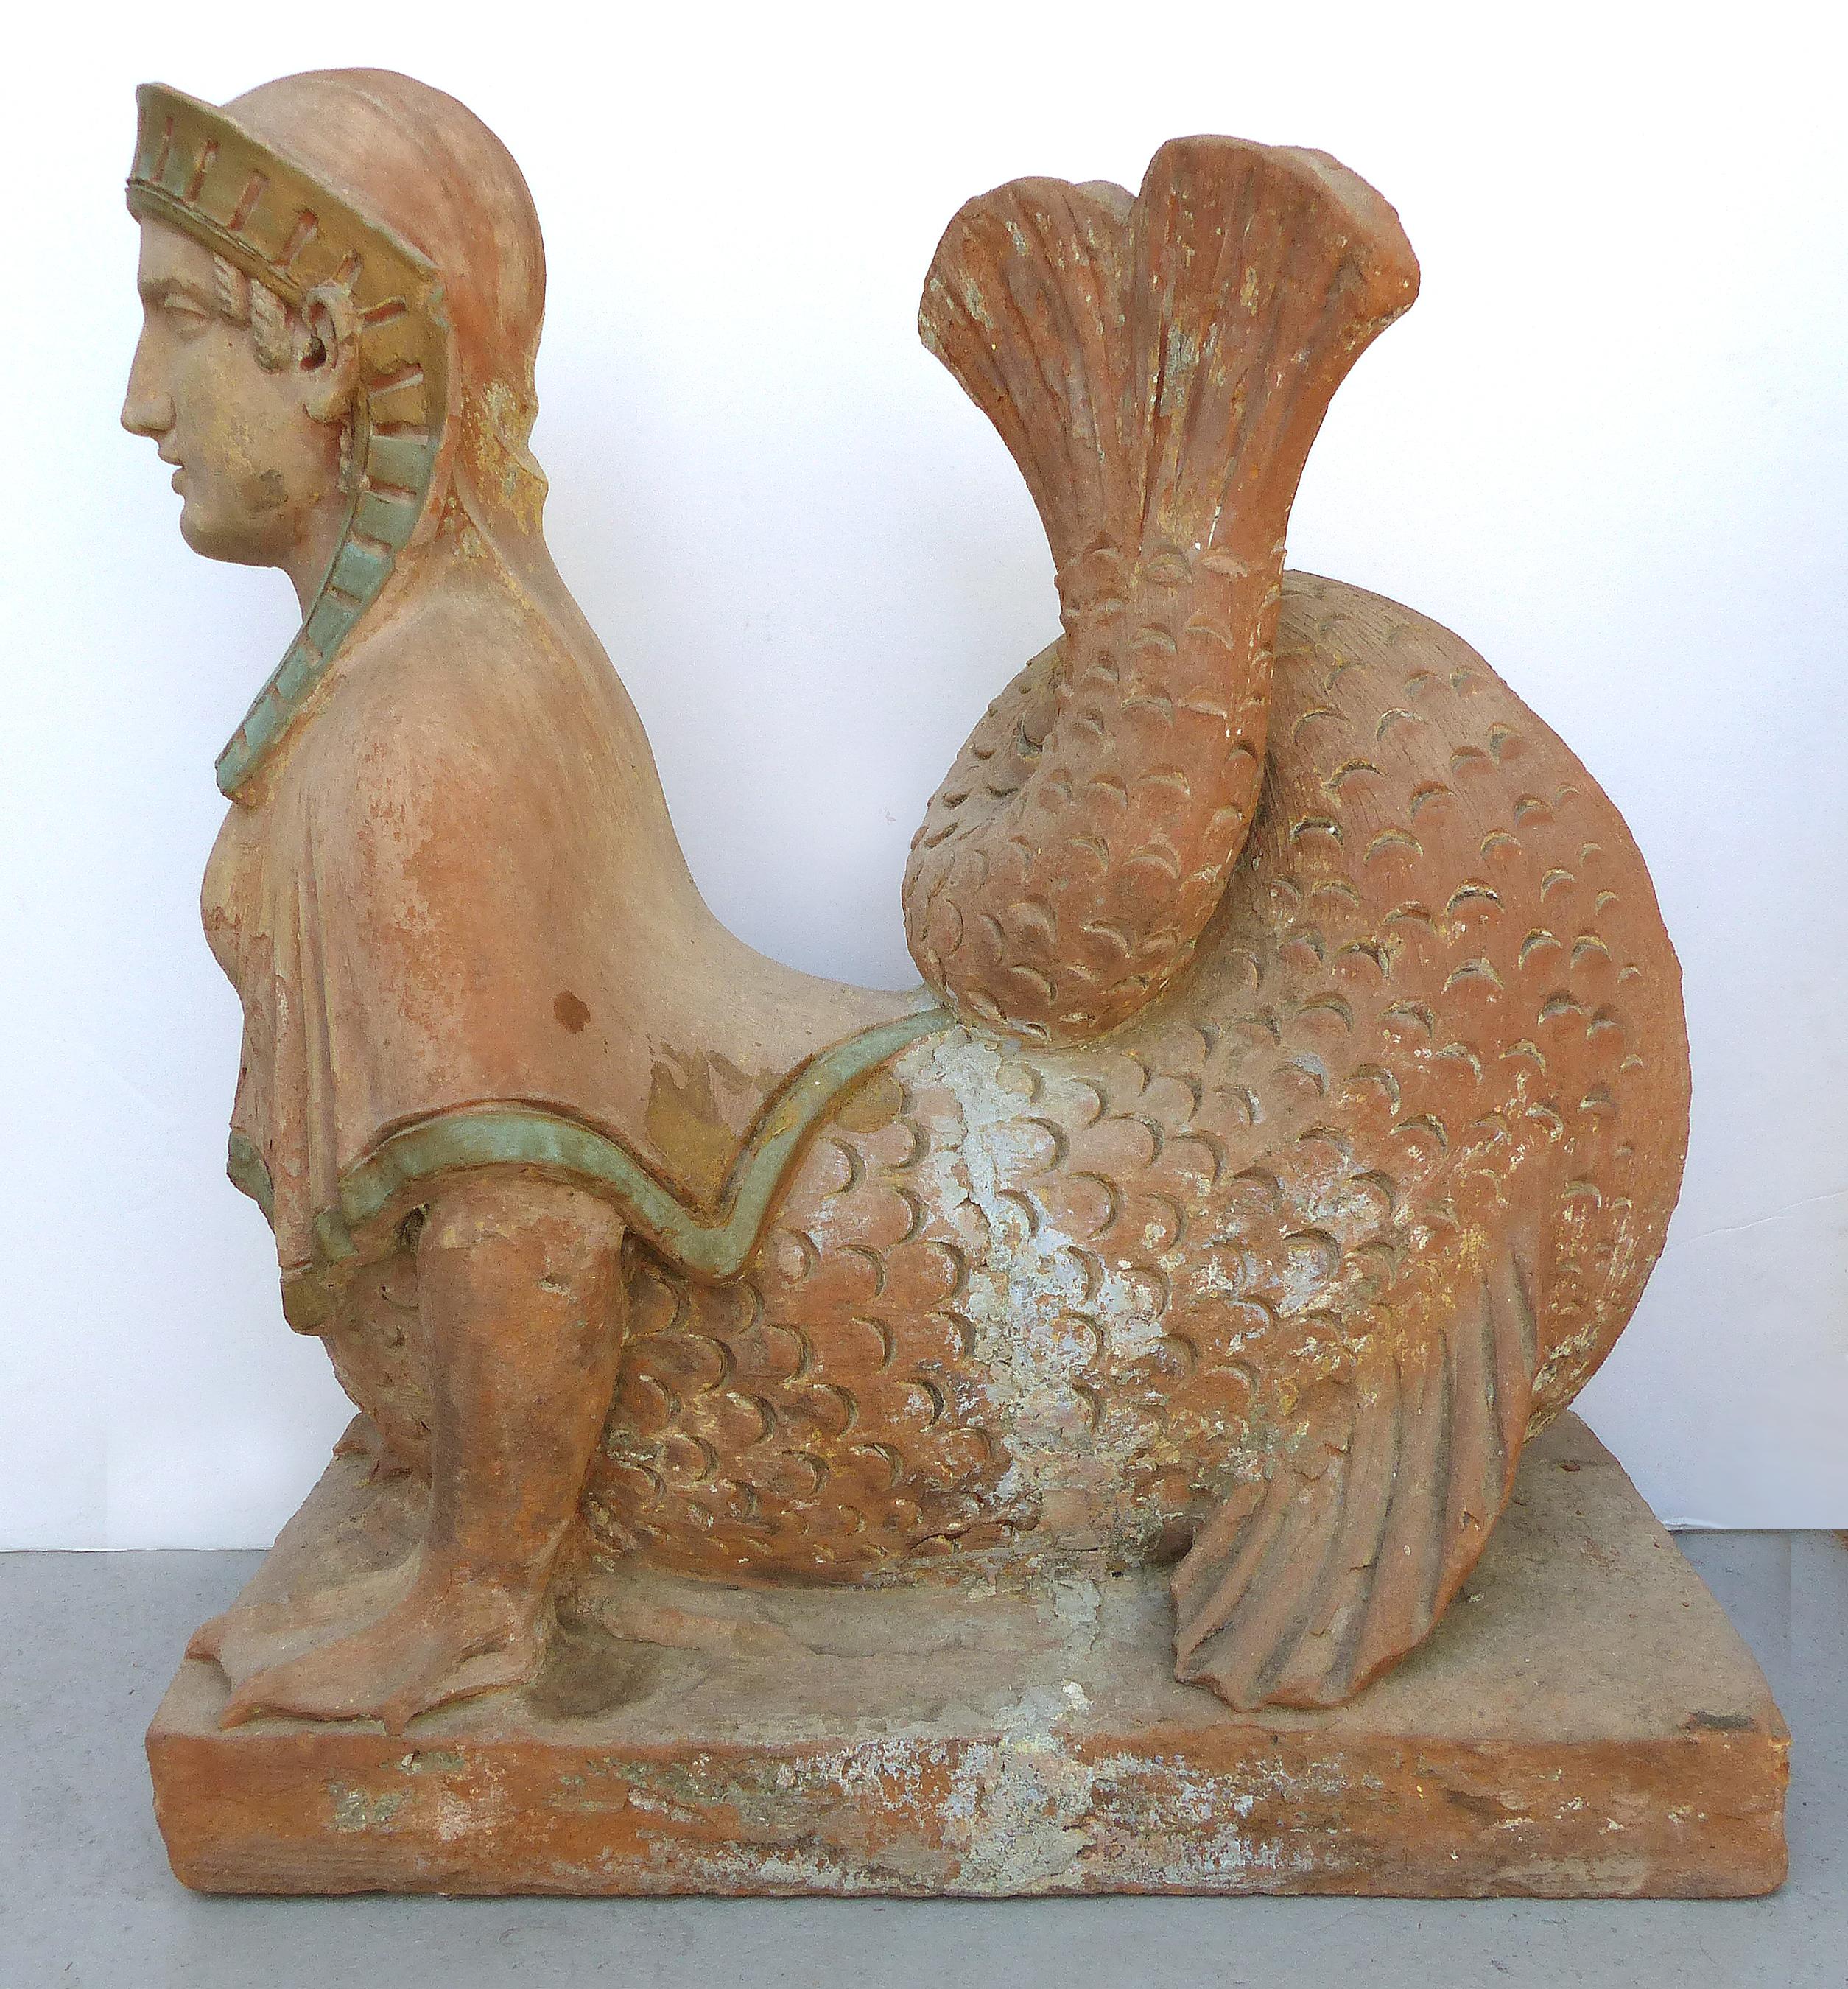 European 18th Century Continental Terracotta Egyptian Revival Sphinxes, a Matched Pair For Sale